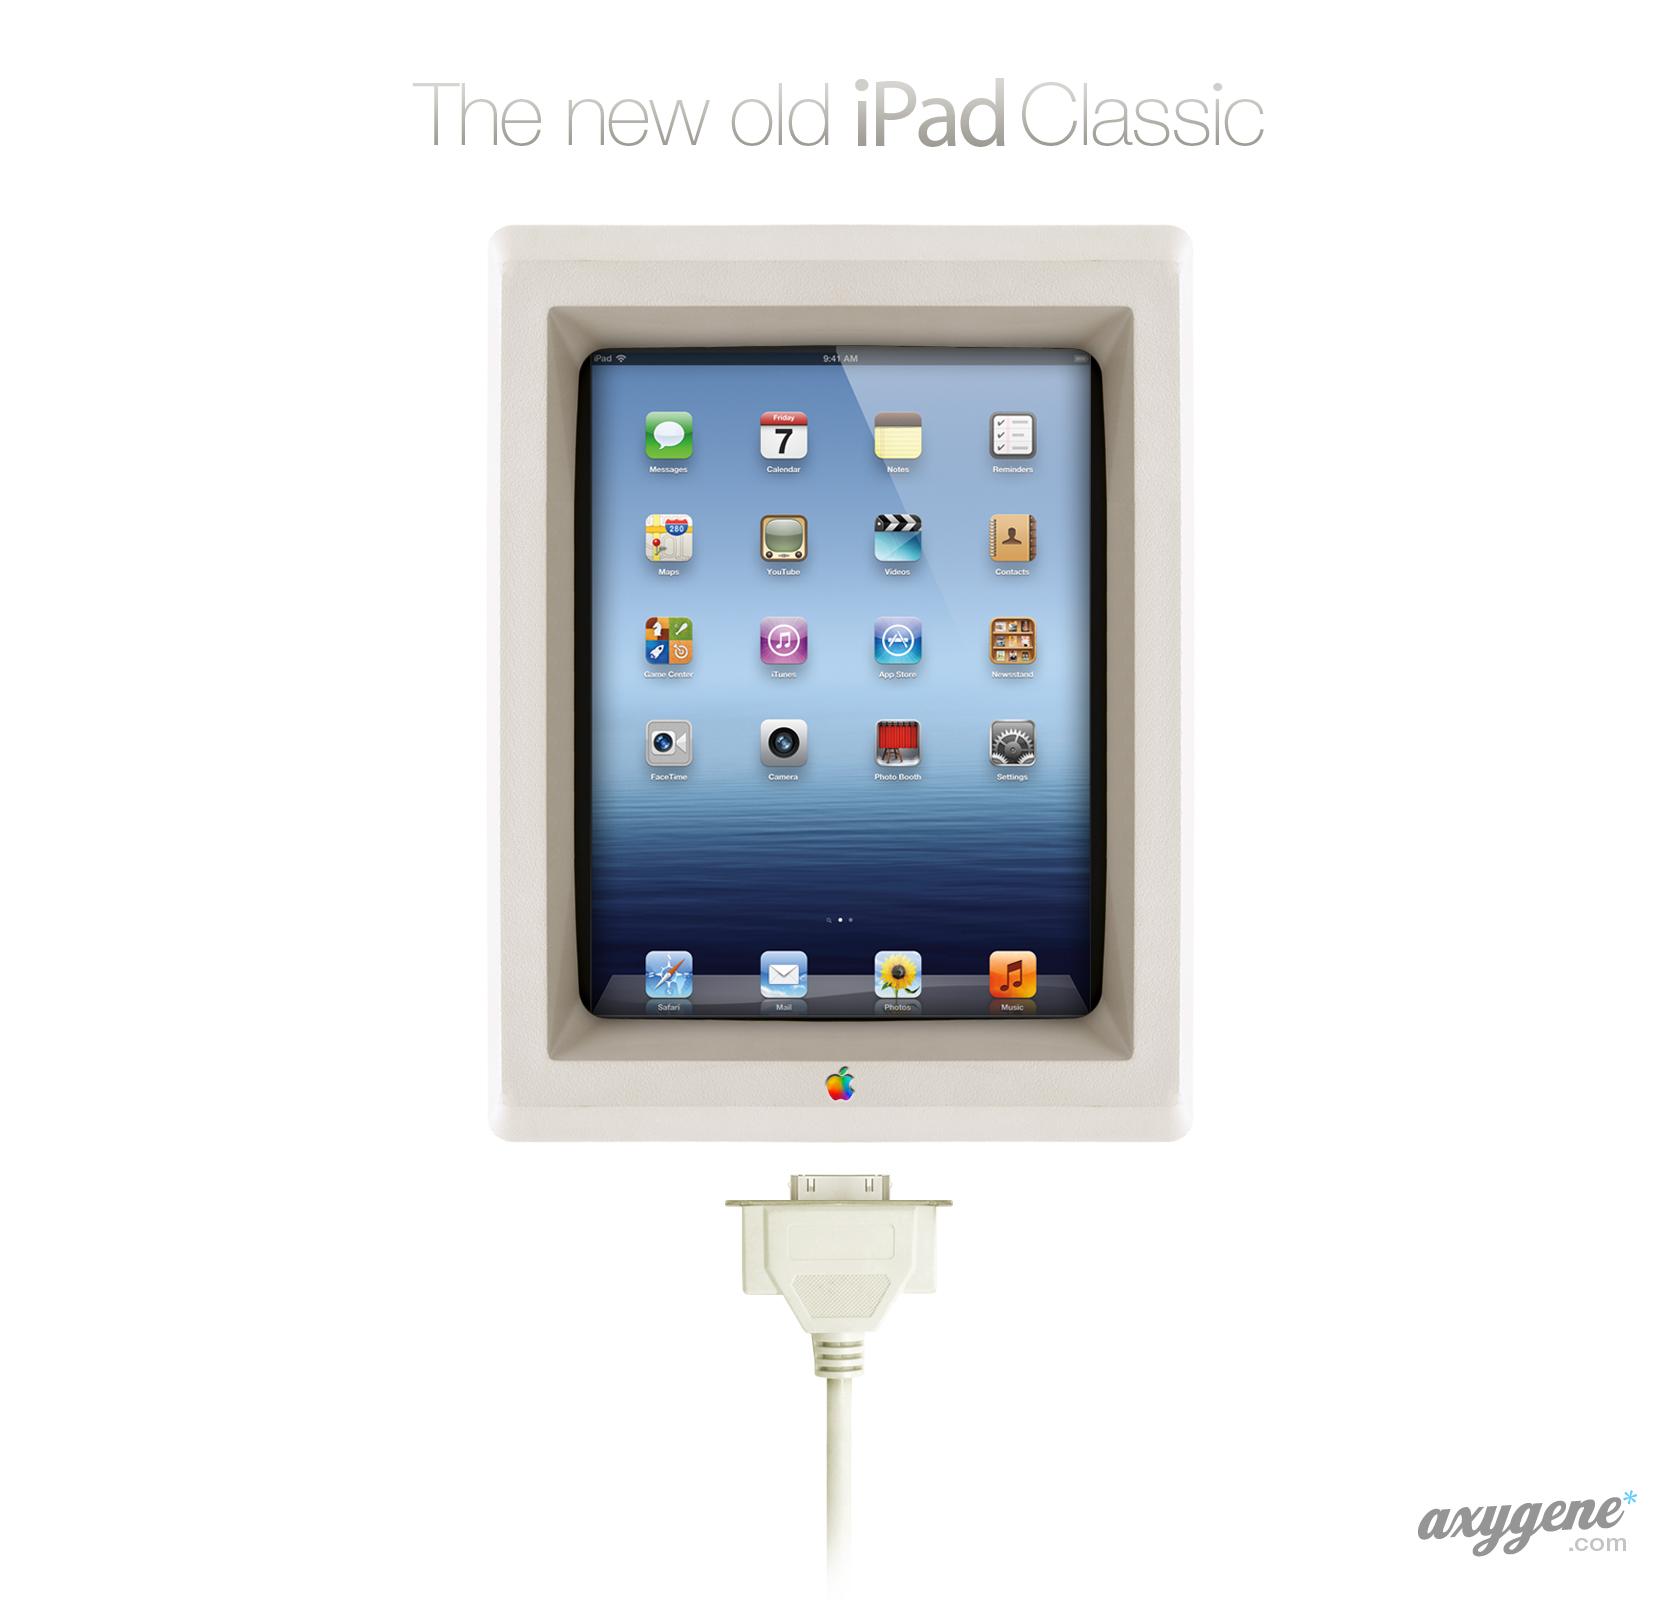 The new old iPad Classic